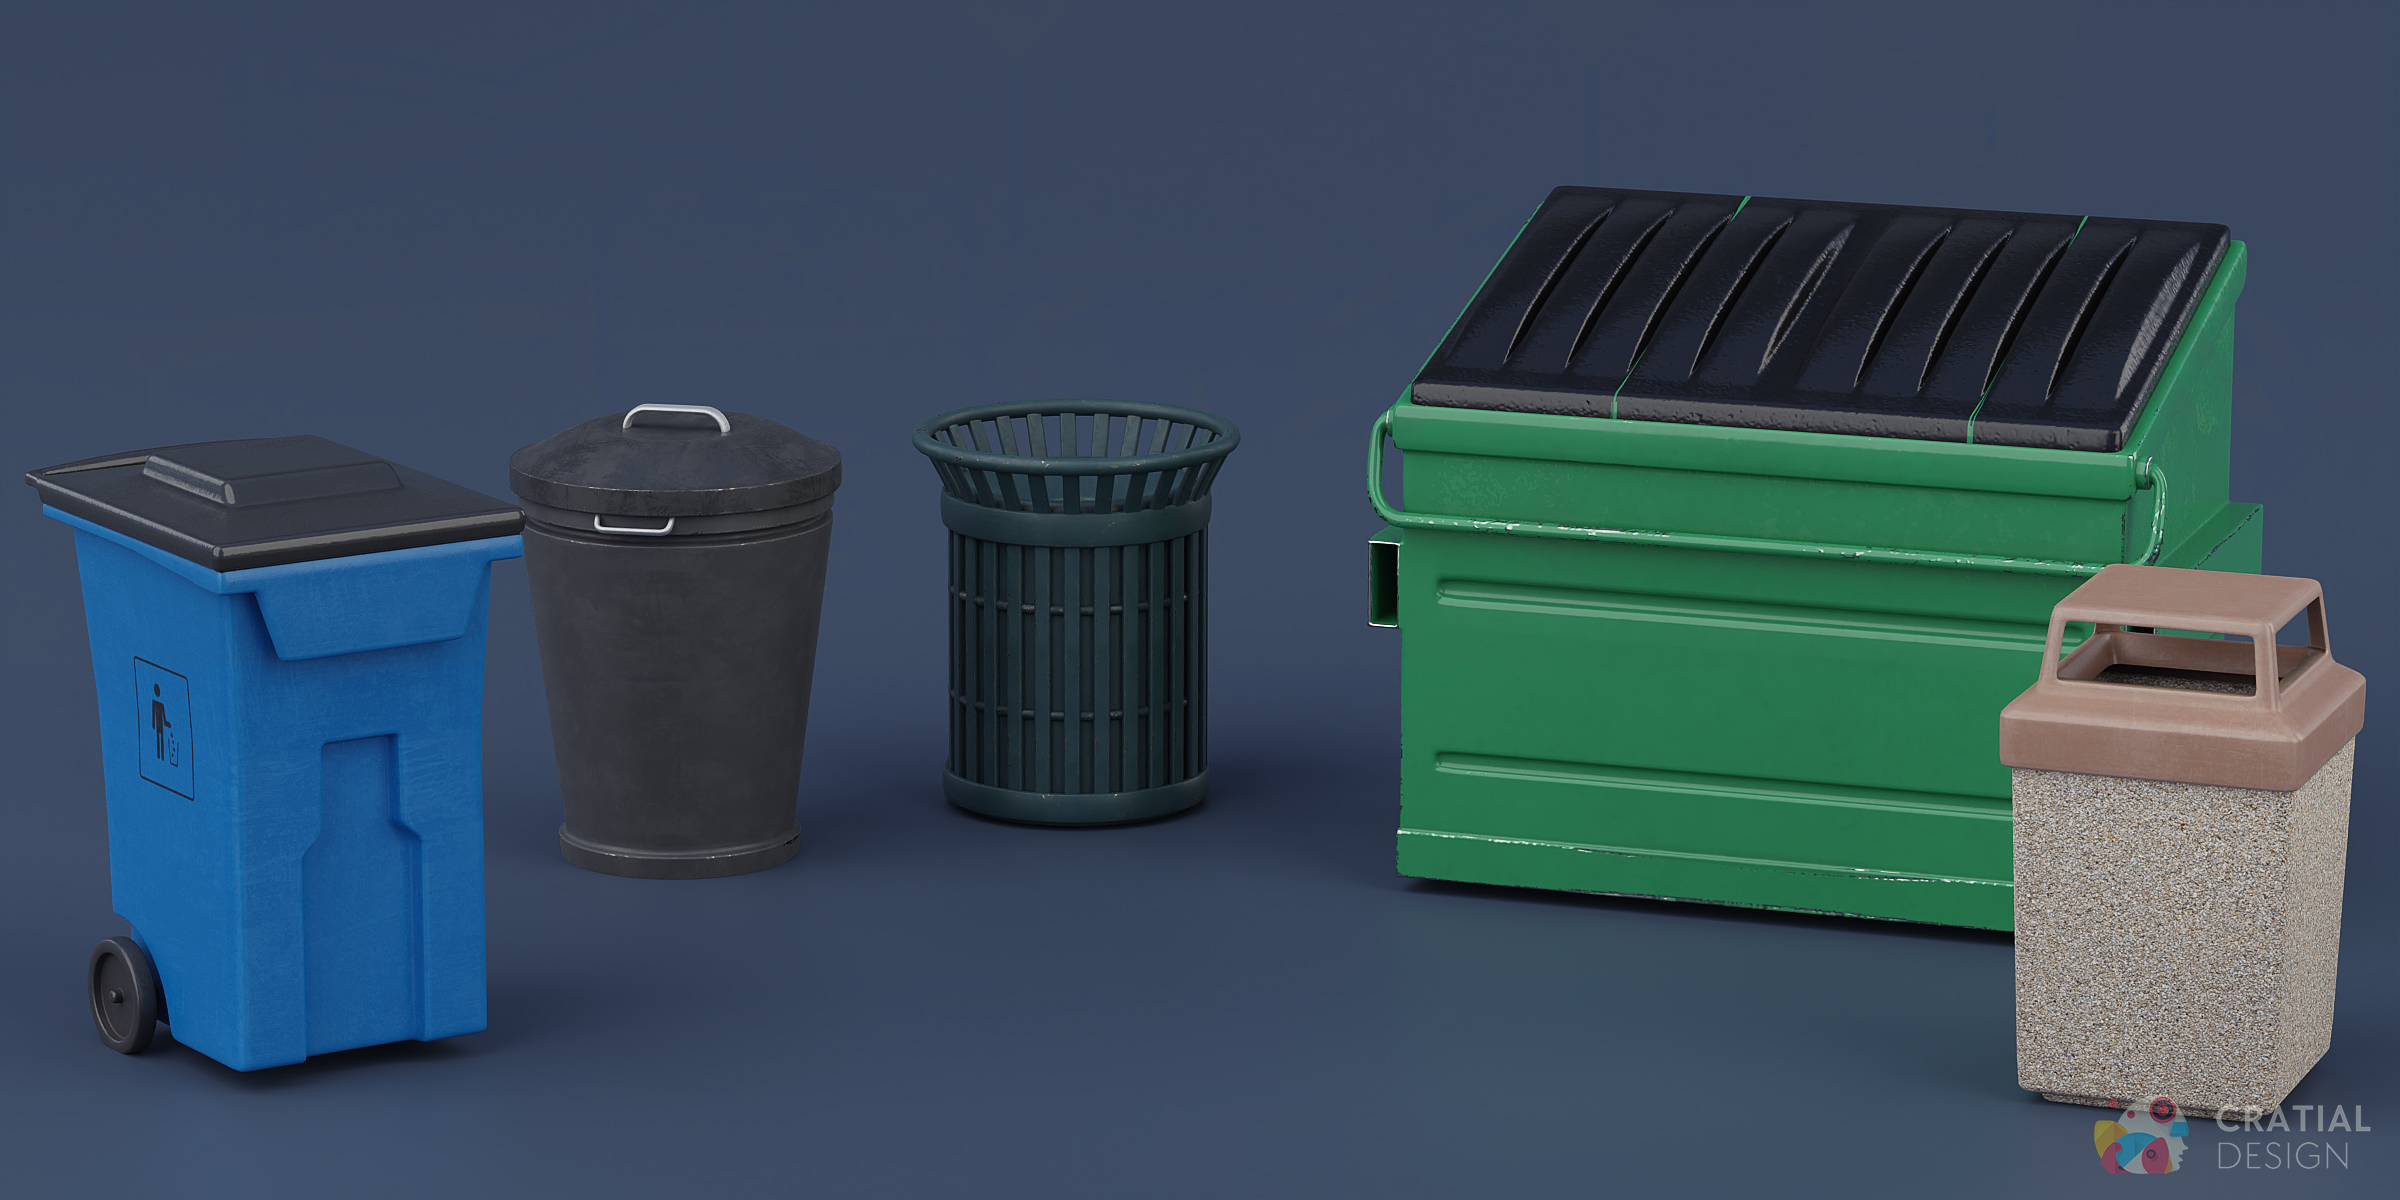 Cratial 3D - City Garbage and Recycling Kit